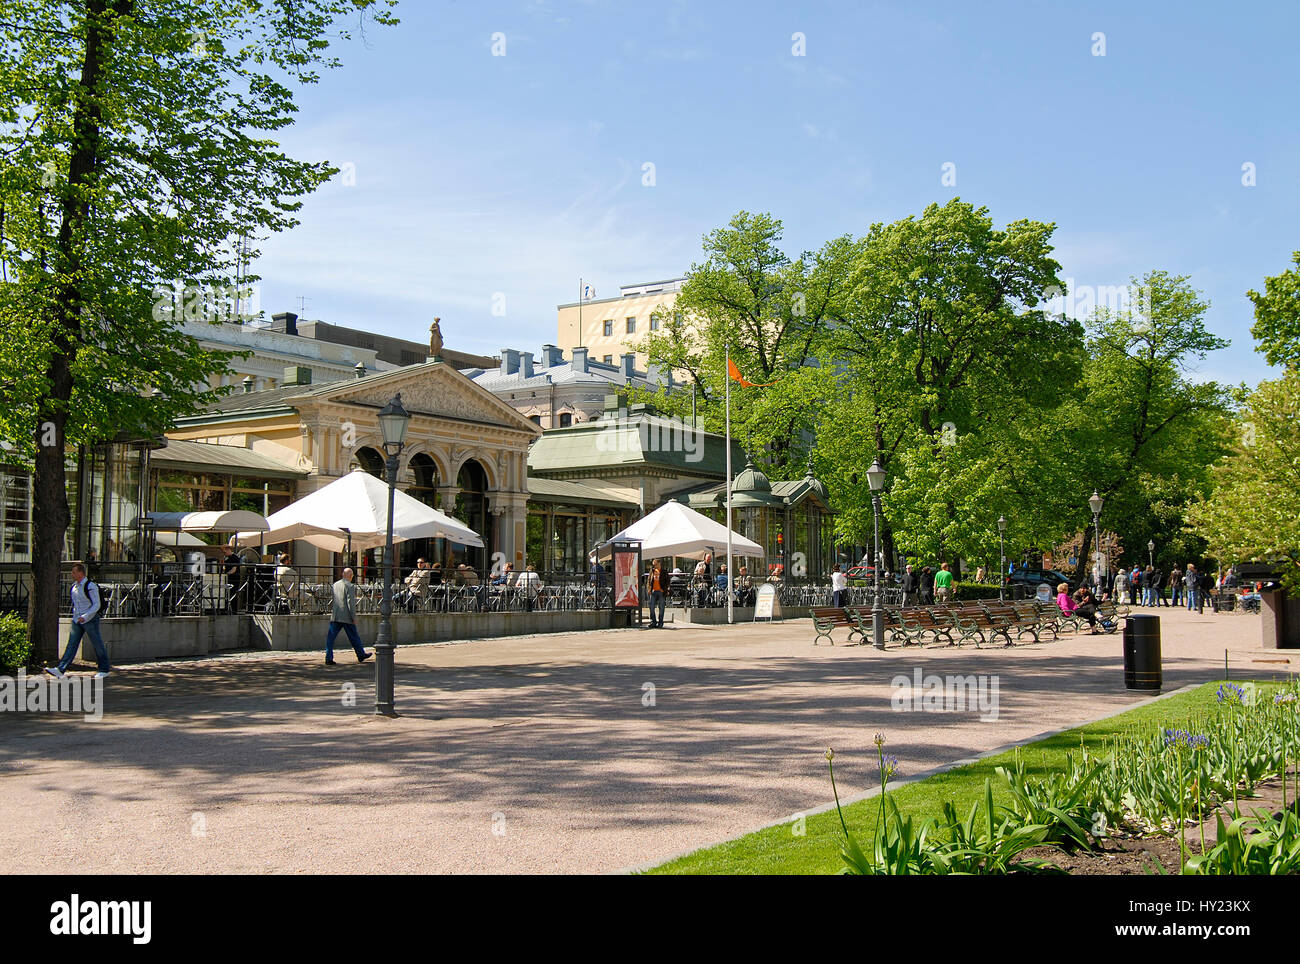 Image of the Esplanade in the city centre of Helsinki, Finland. Stock Photo